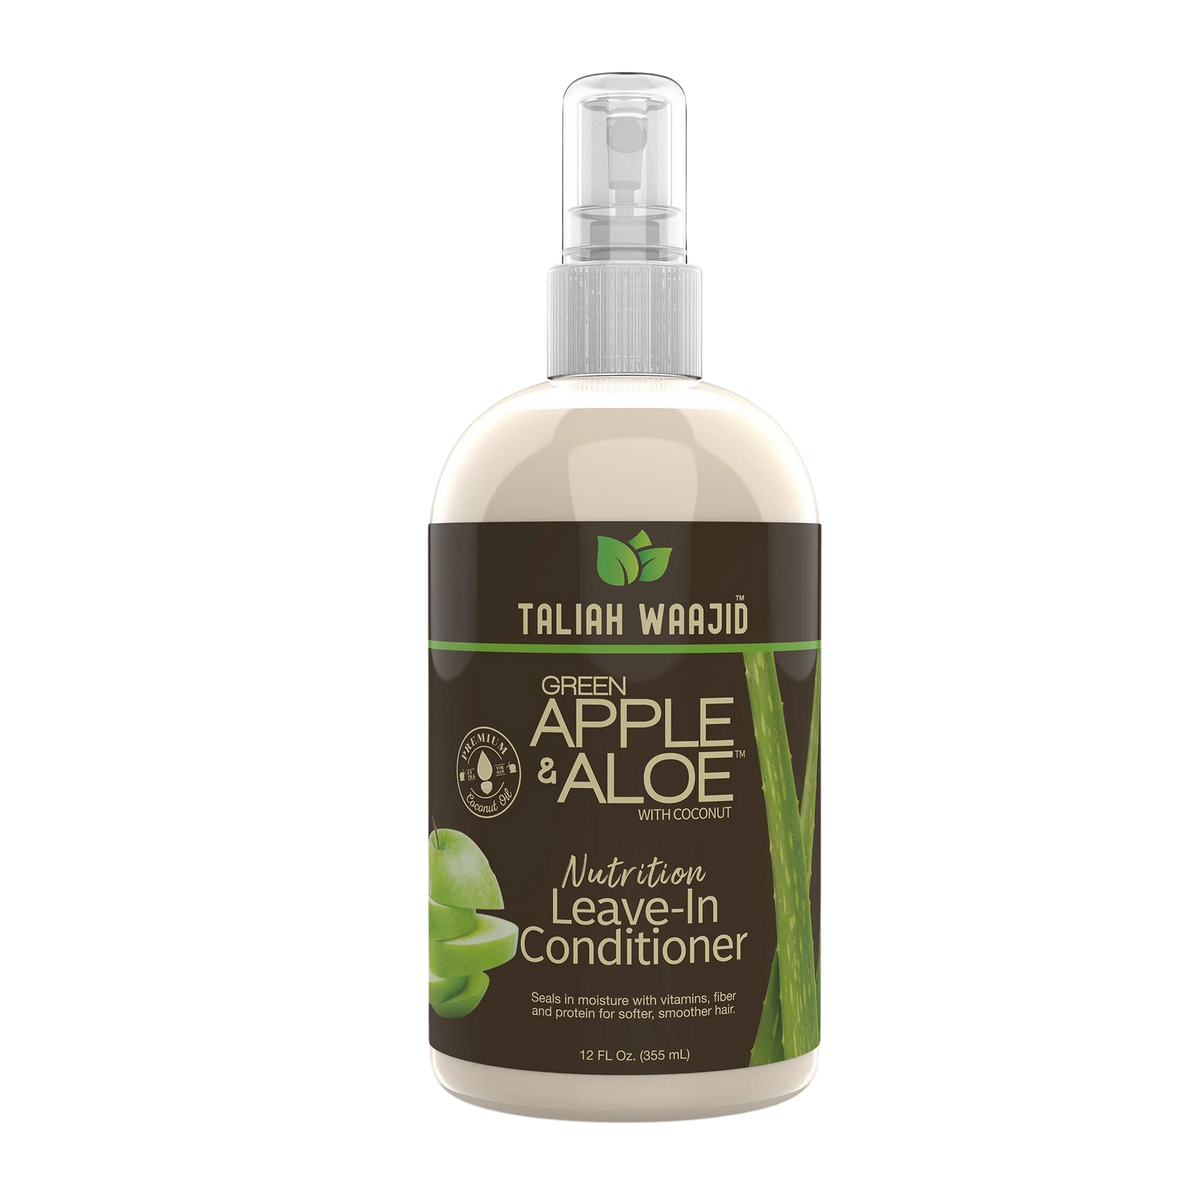 Taliah Waajid | Green Apple And Aloe Nutrition Leave-In Conditioner | 12oz